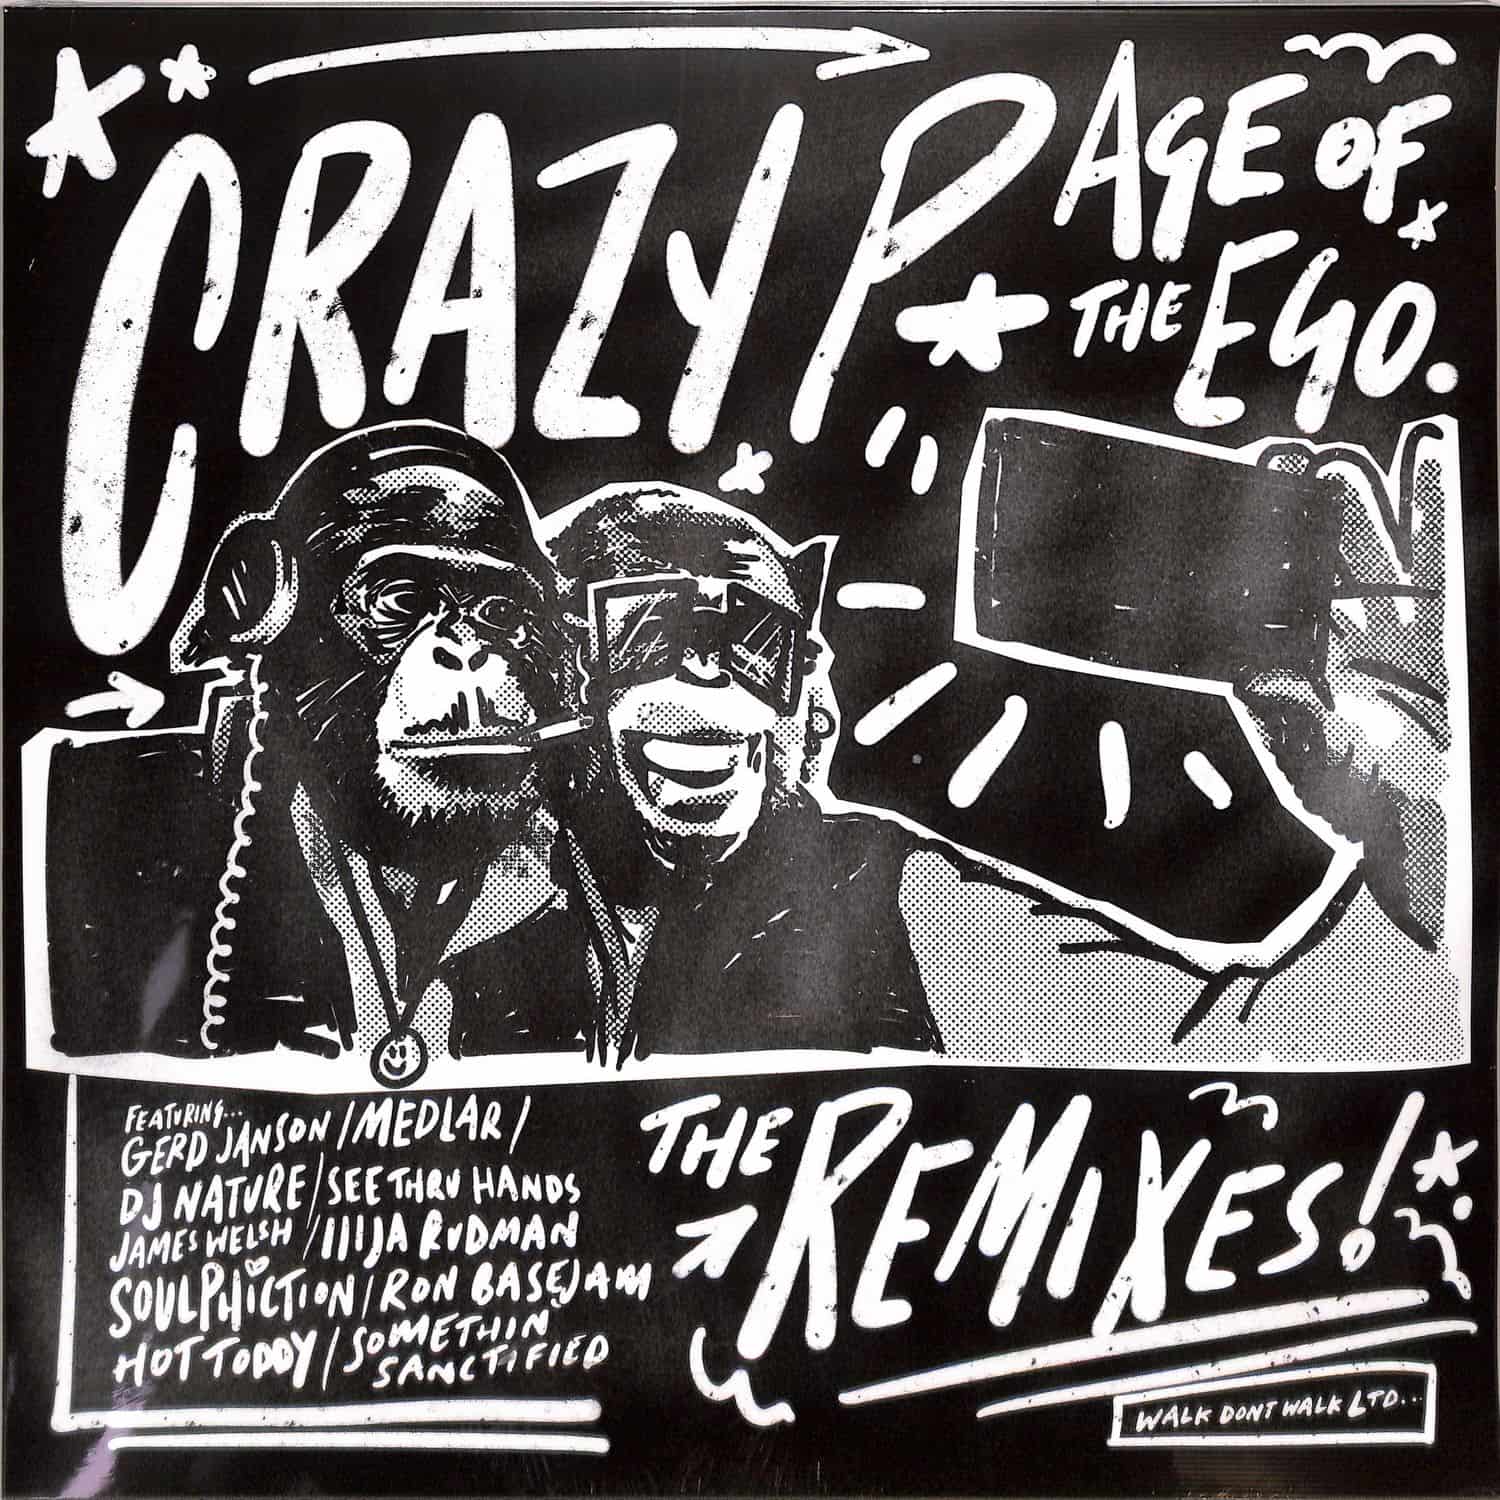 Crazy P - AGE OF THE EGO - REMIXES 